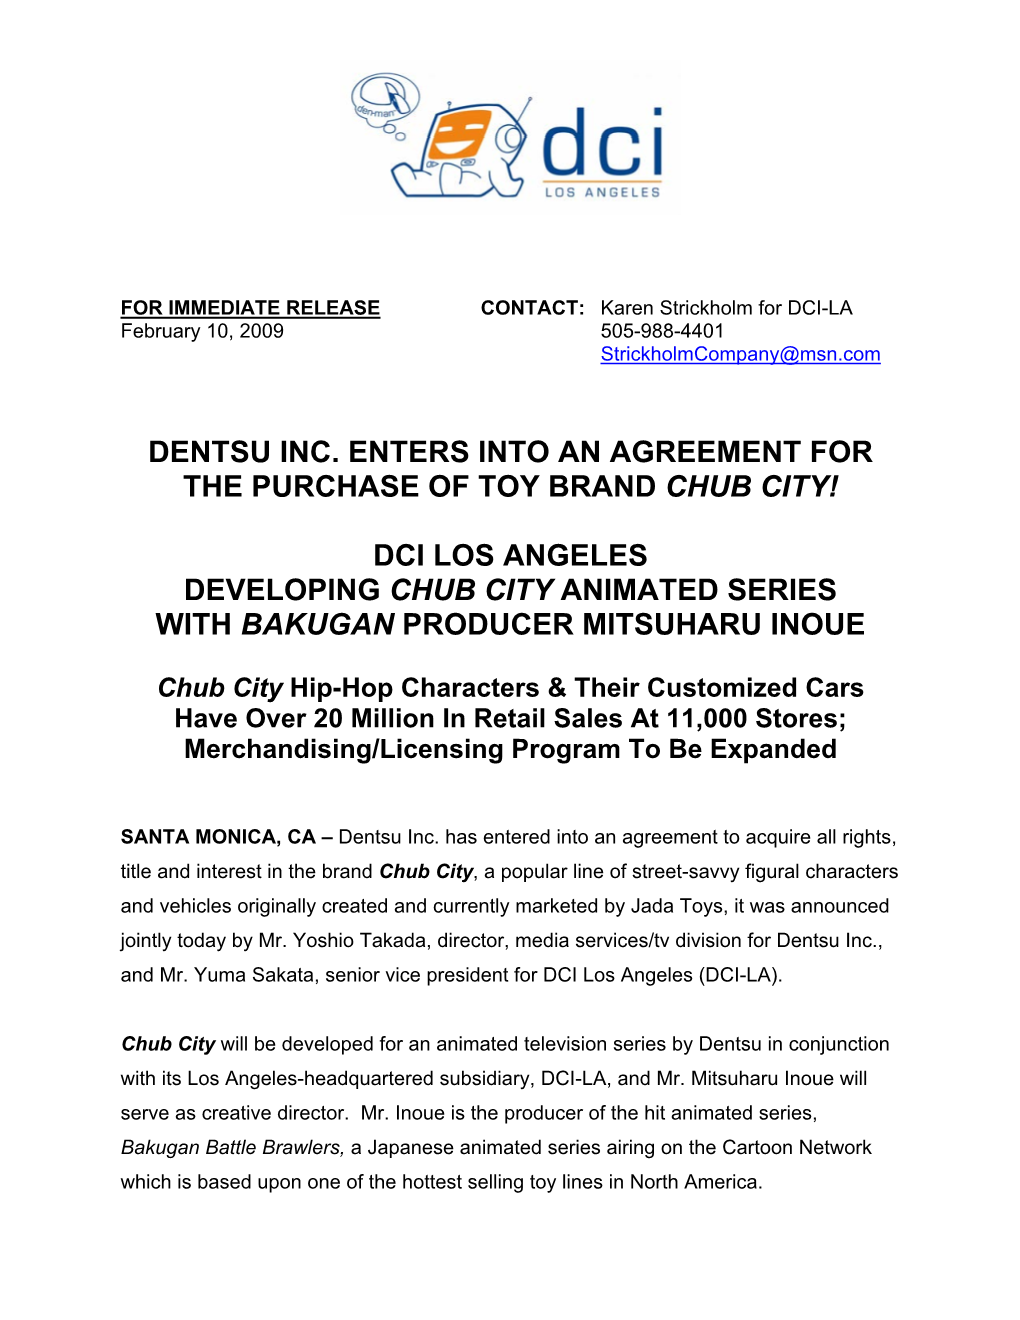 02/10/2009 Dentsu Inc. Enters Into an Agreement for the Purchase of Toy